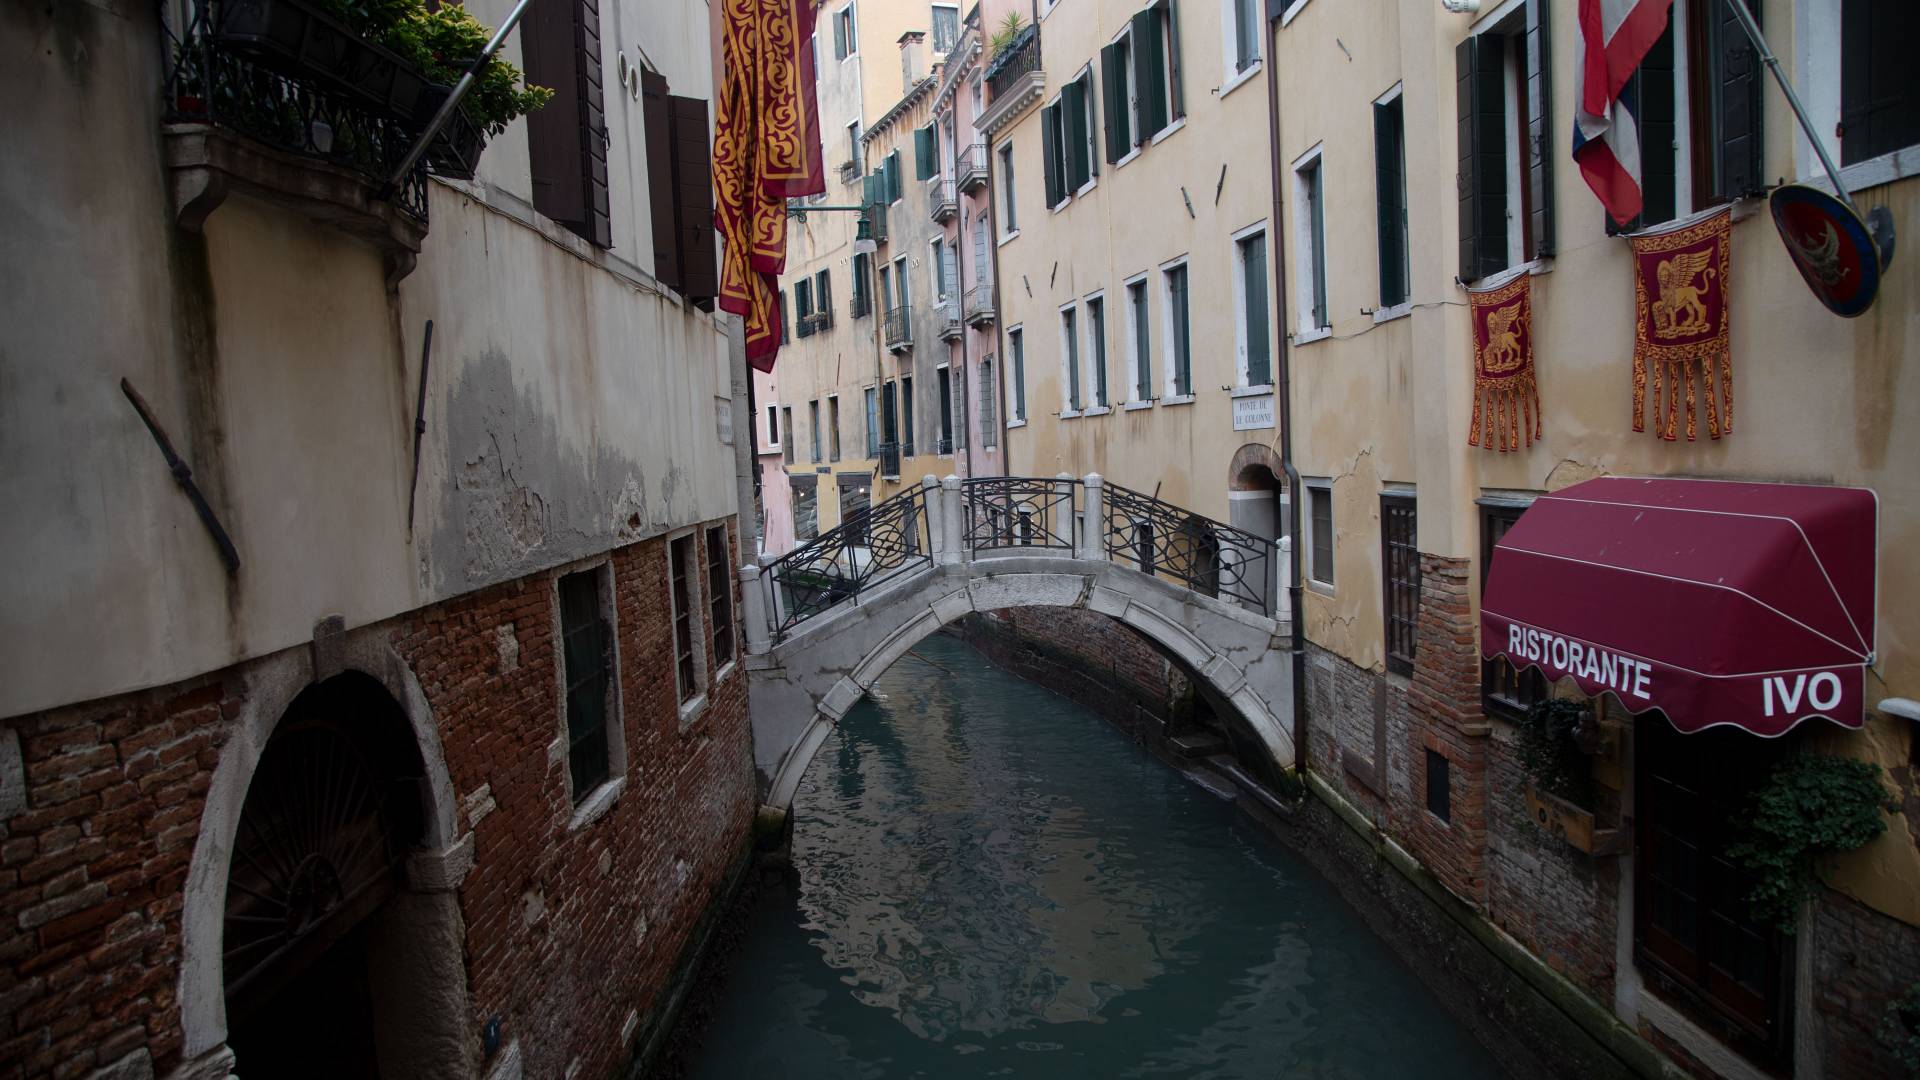 Houses and shops along Venice canal